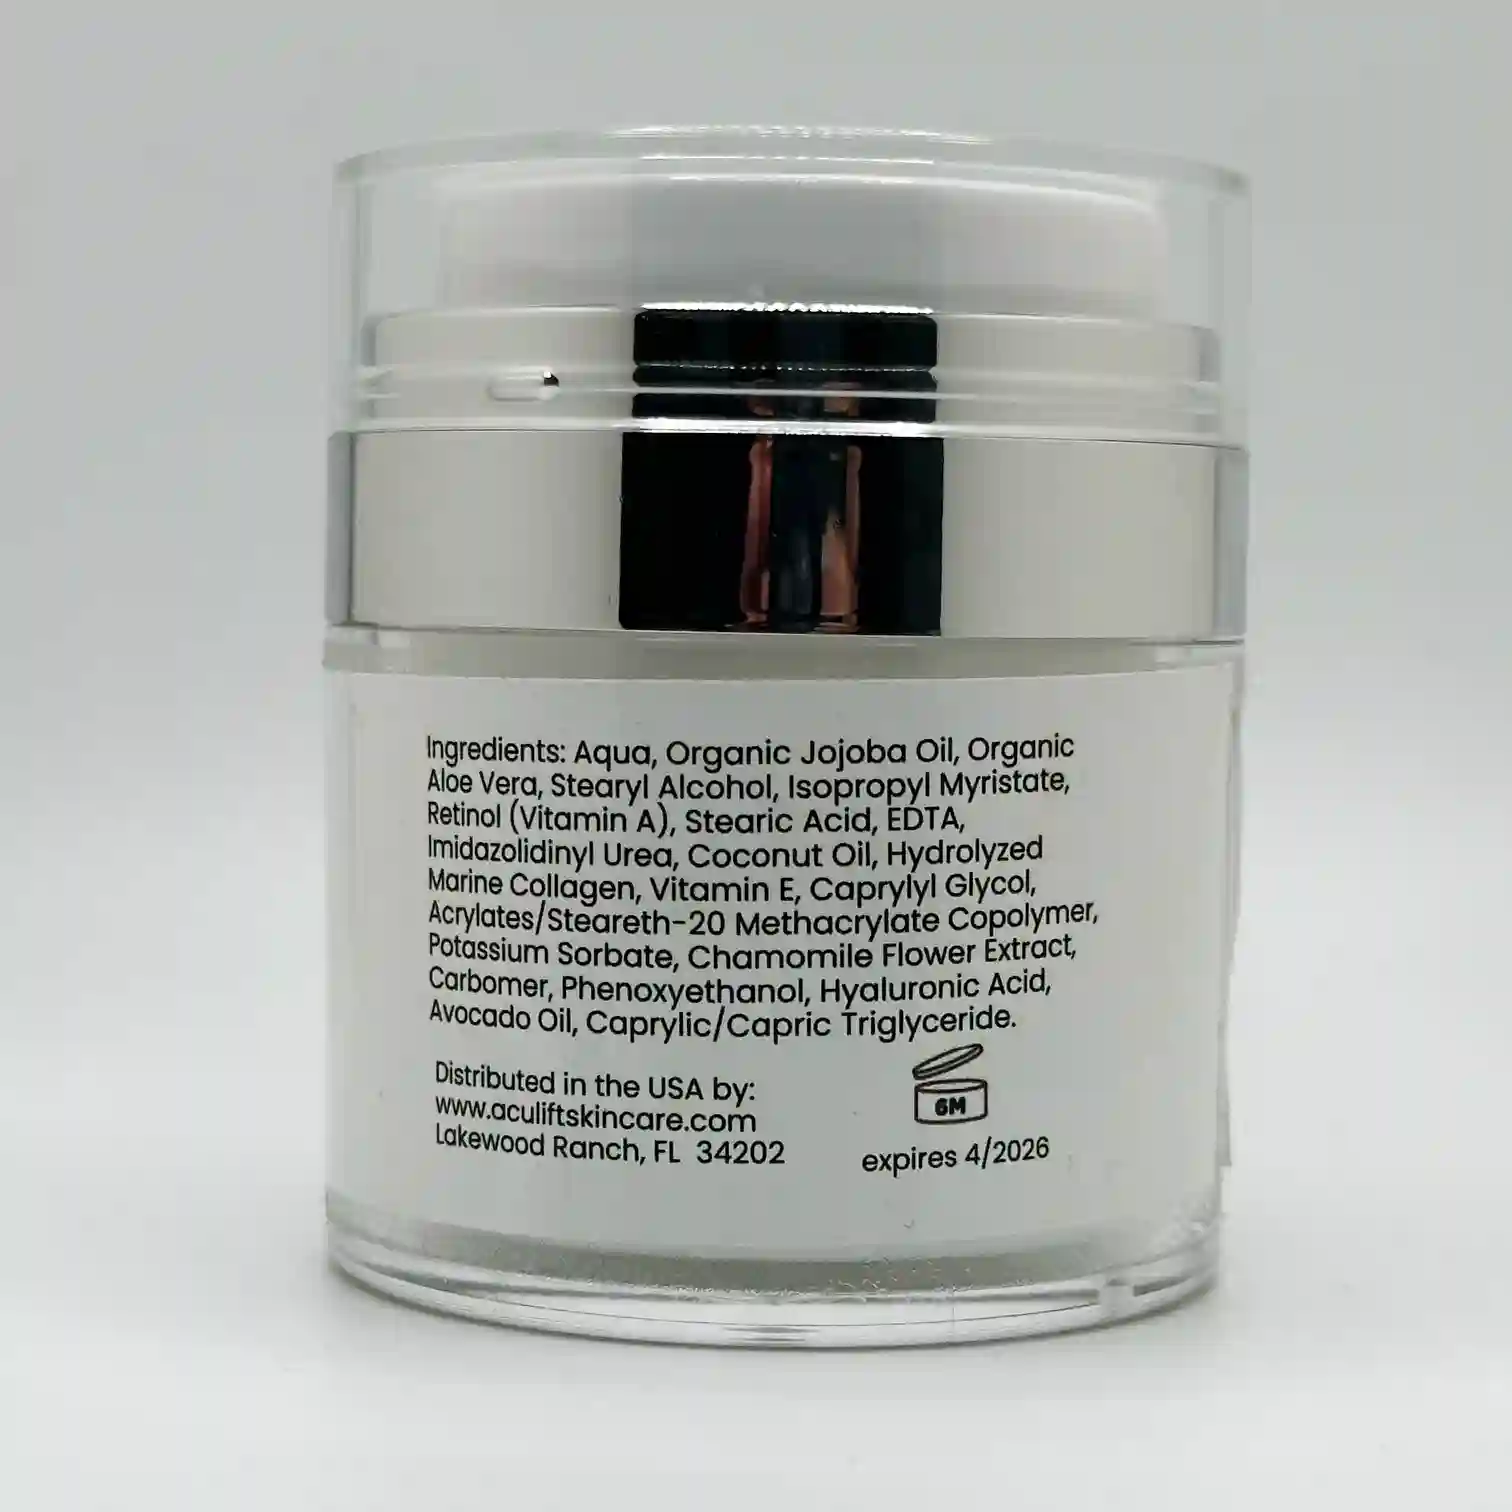 AcuLift Firming Cream Ingredients List